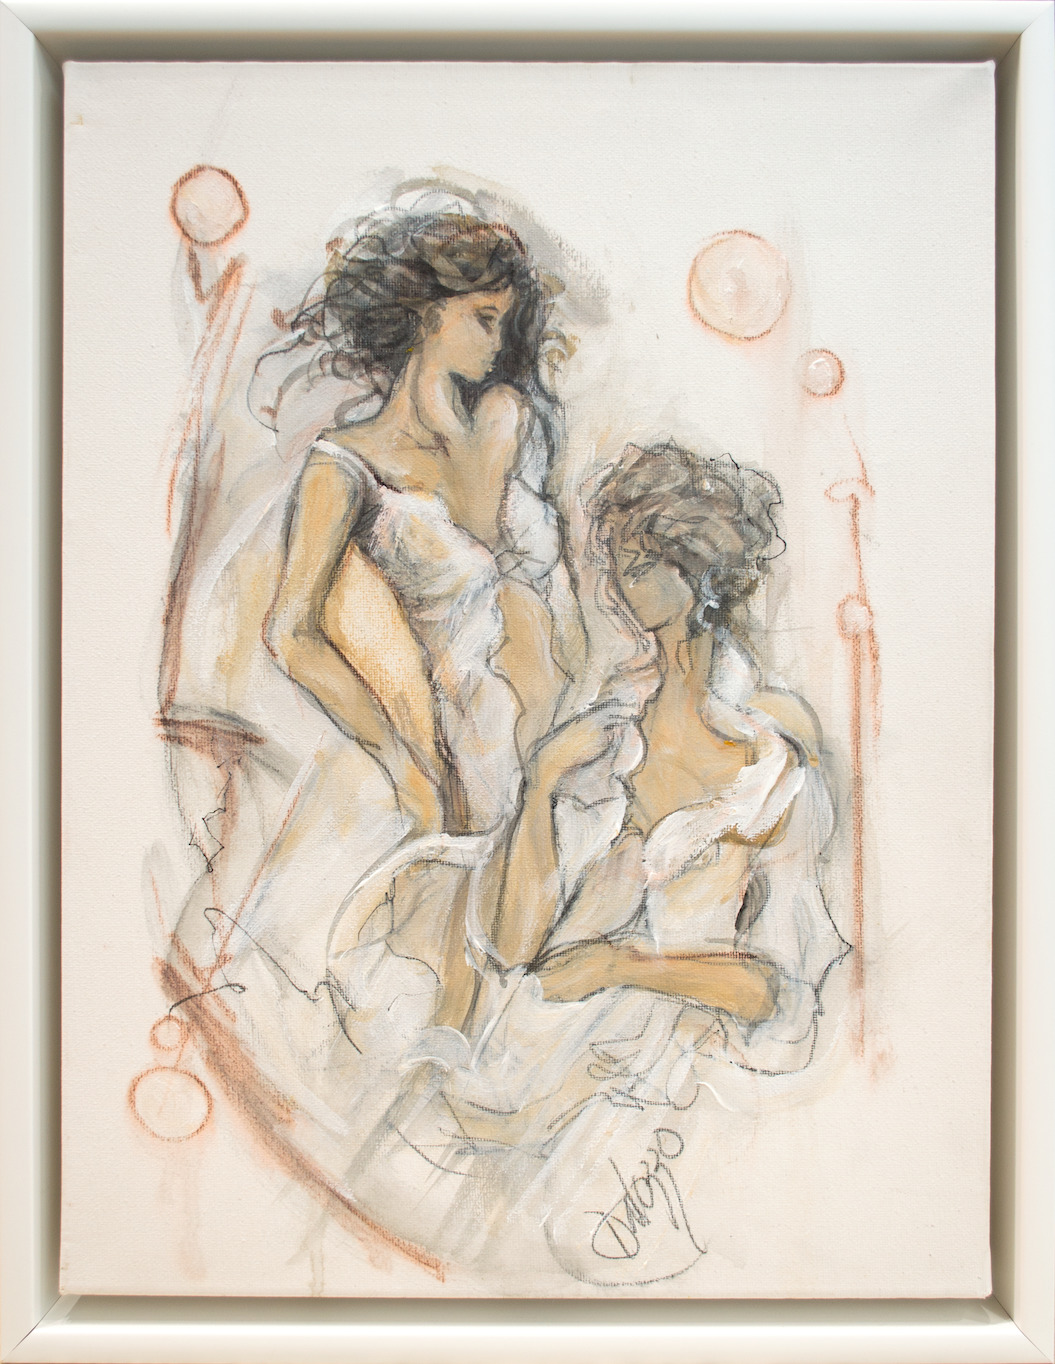 Framed Front View Of Nude Painting "Two Friends" By Lucette Dalozzo